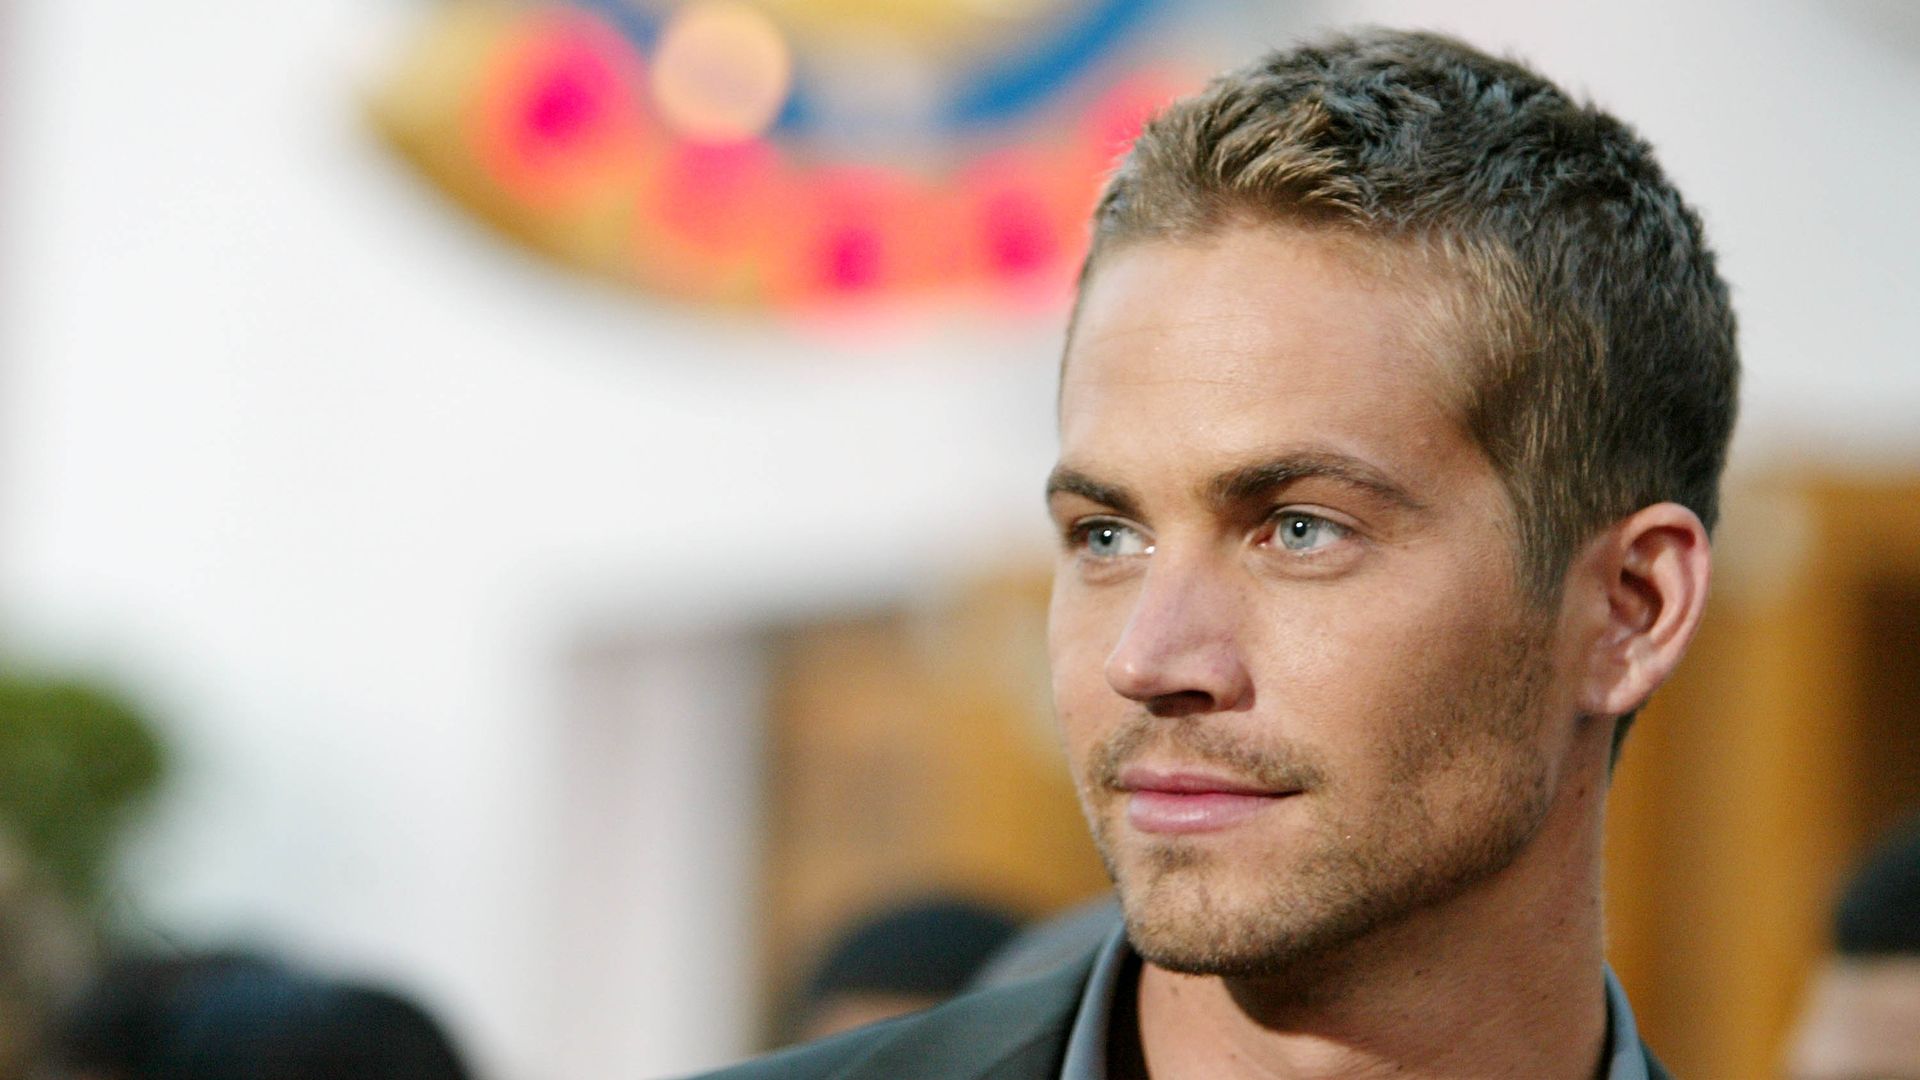 Paul Walker during The World Premiere of "2 Fast 2 Furious" at Universal Amphitheatre in Universal City, California, United States.